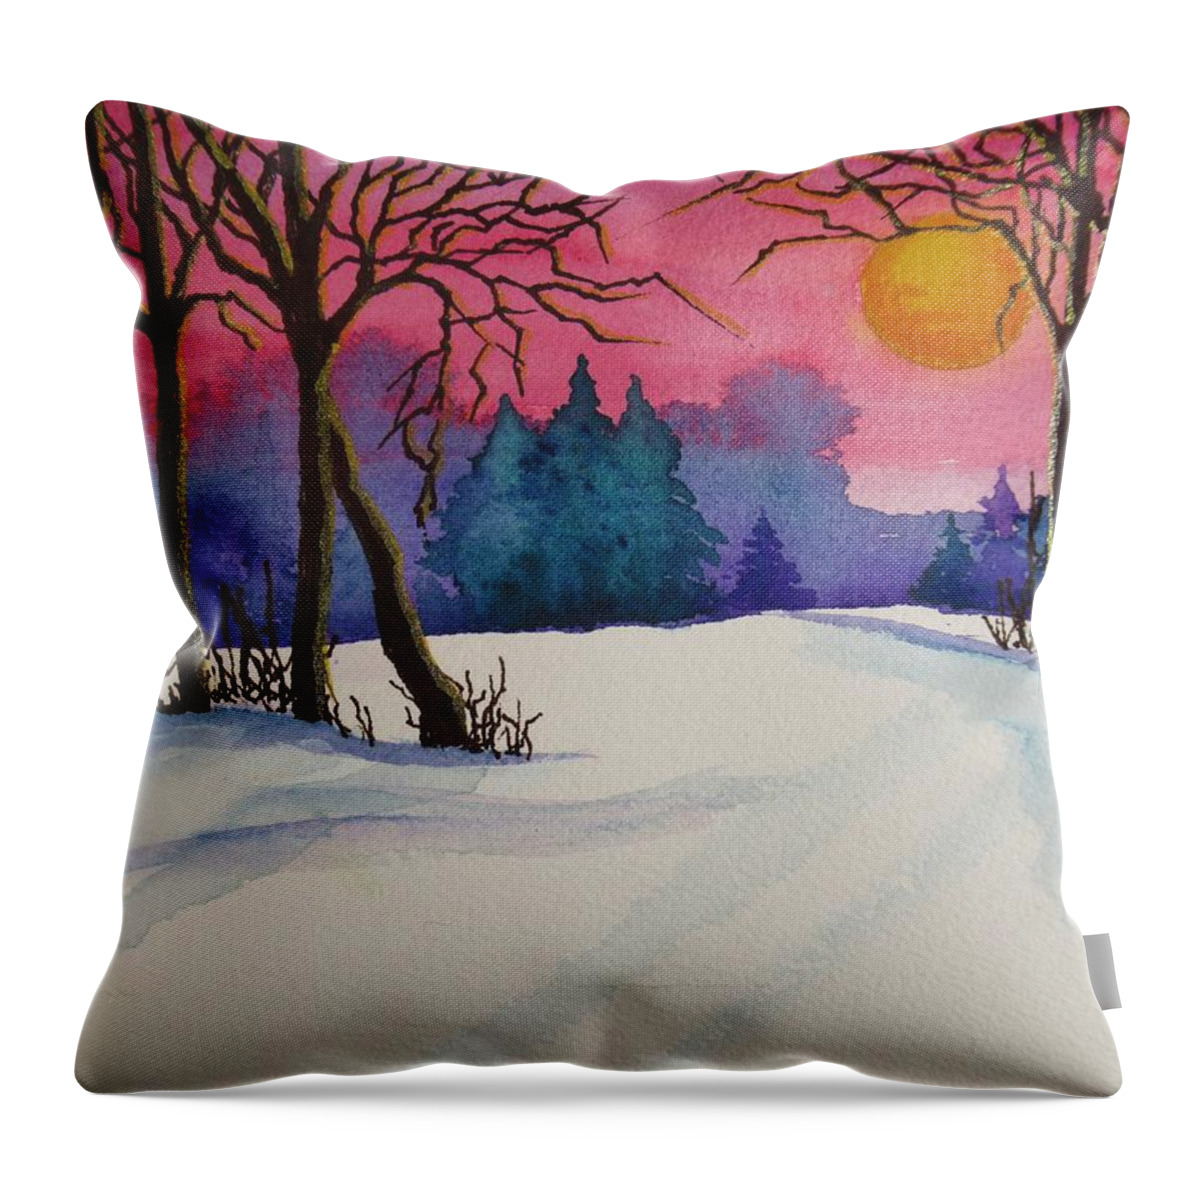 Landscape Throw Pillow featuring the painting Twilight Rose by Dale Bernard